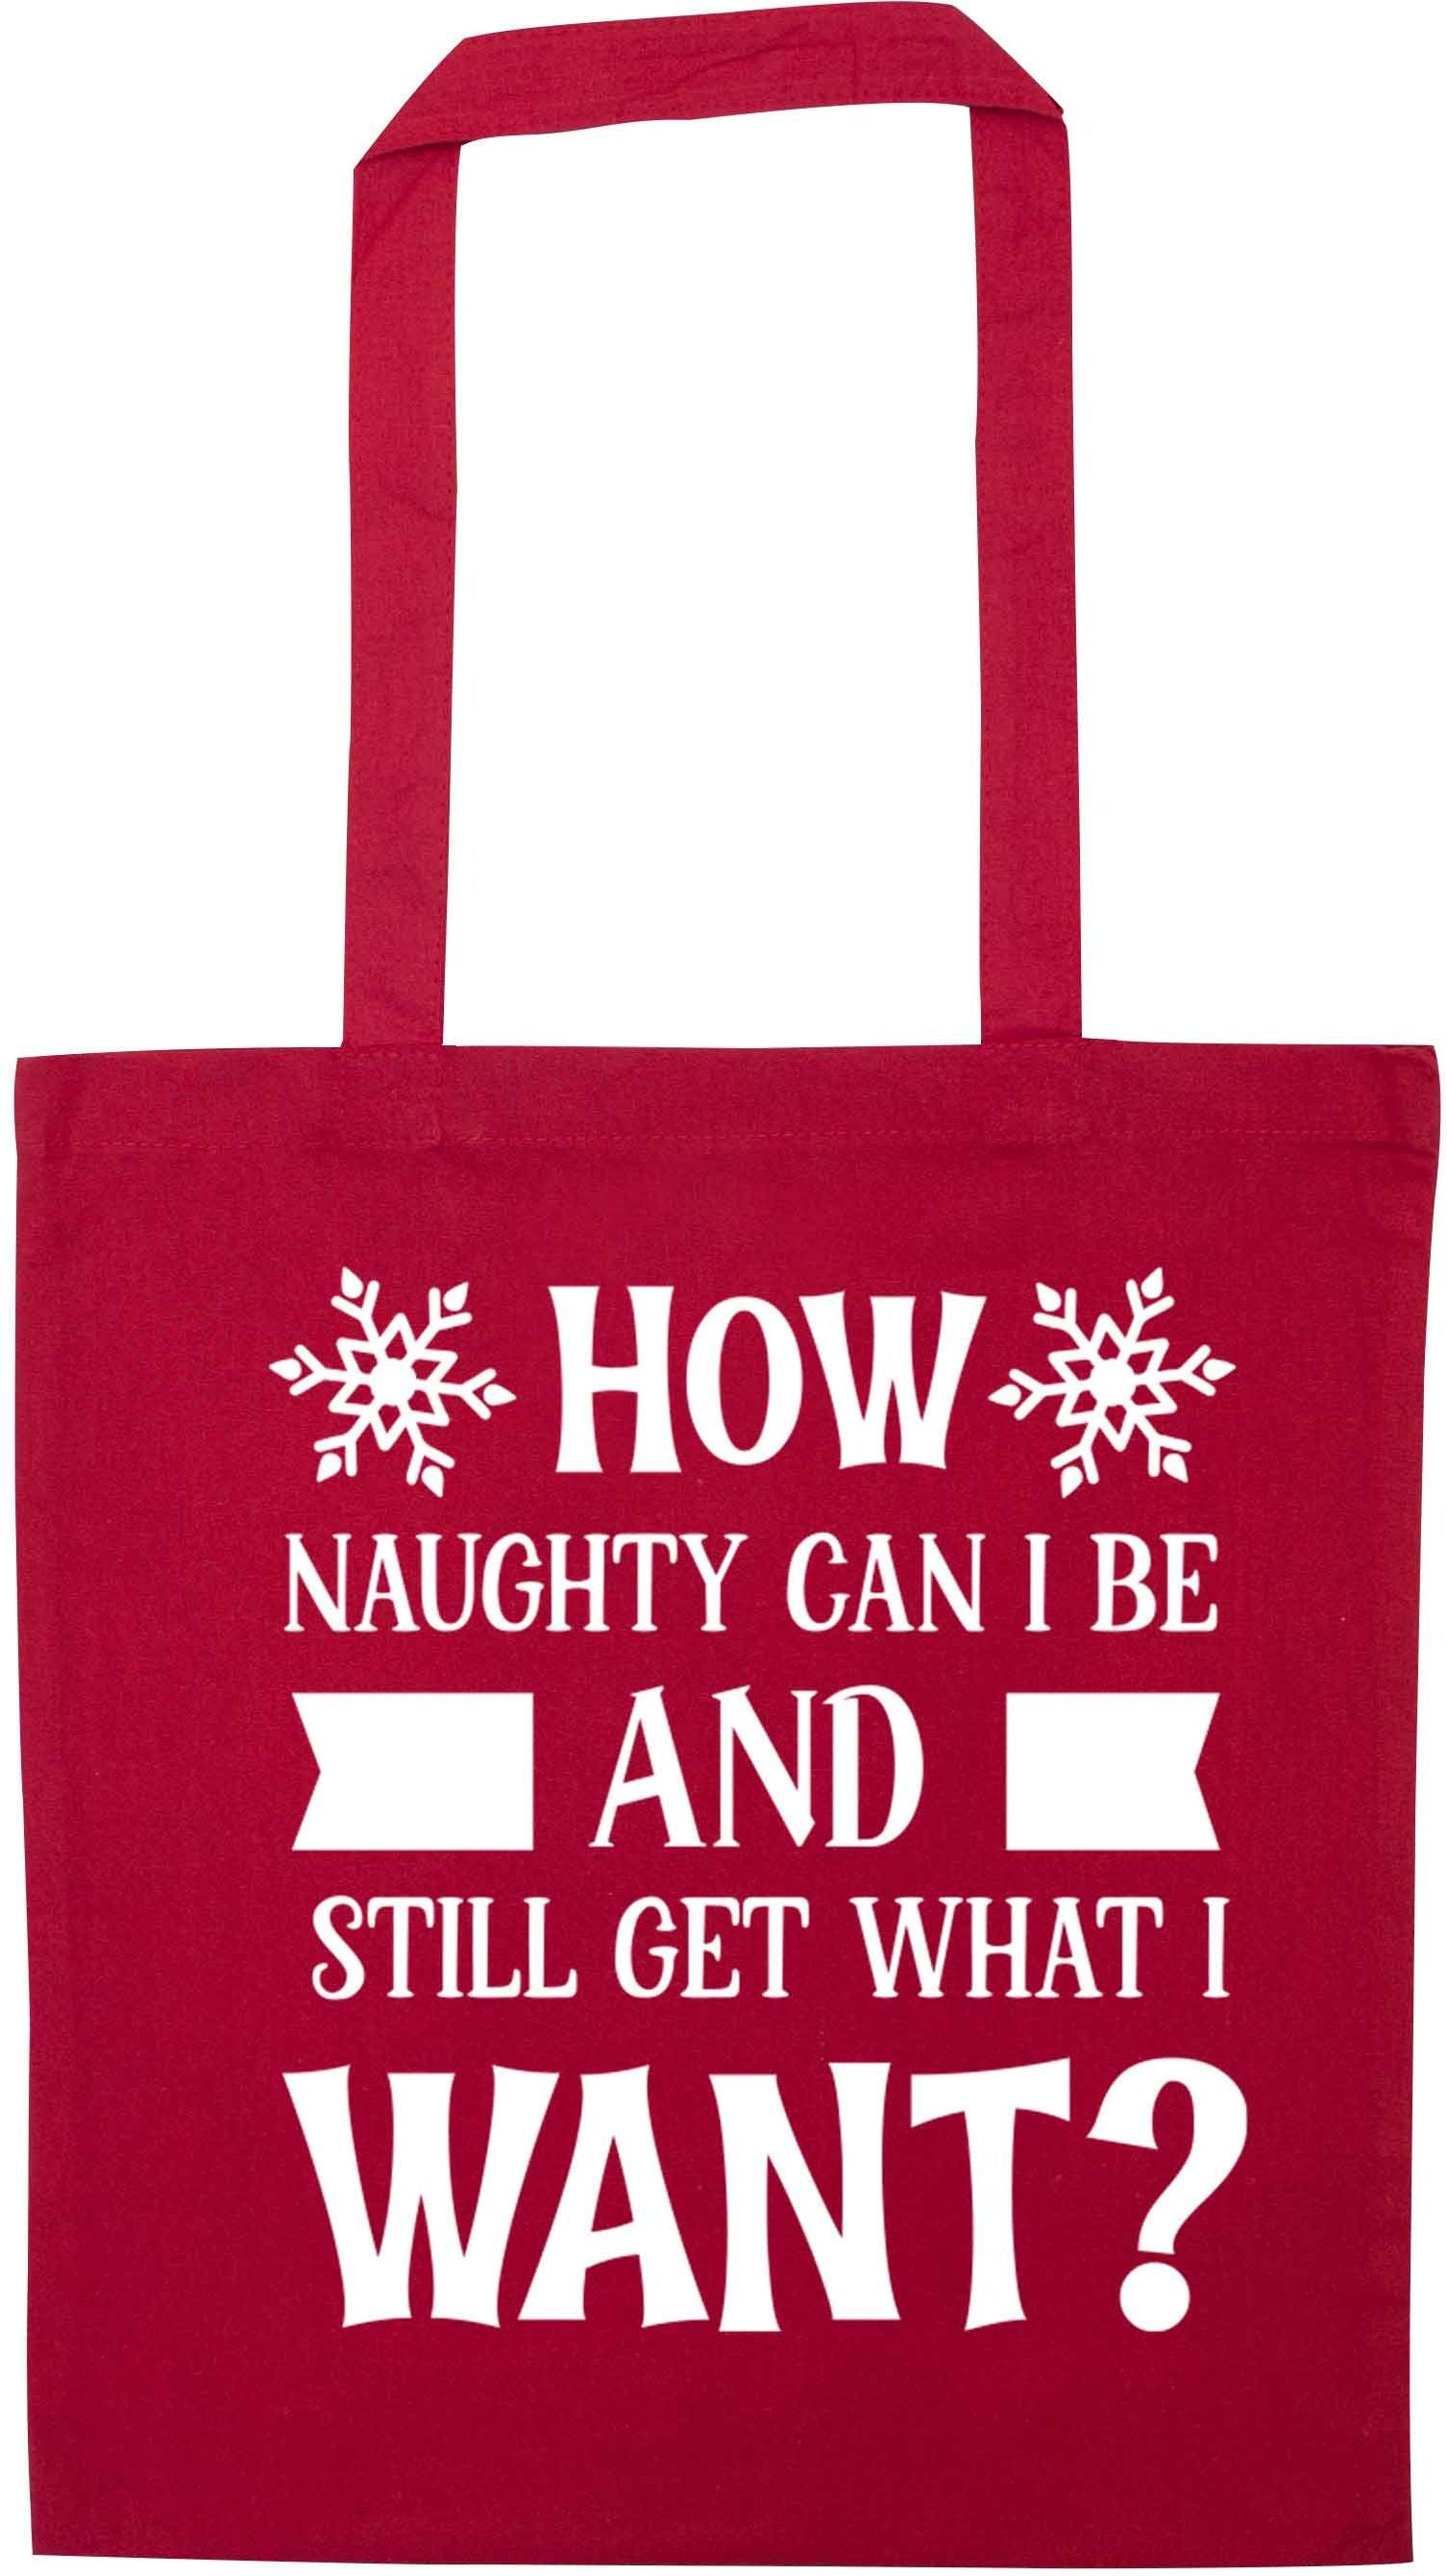 How naughty can I be and still get what I want? red tote bag